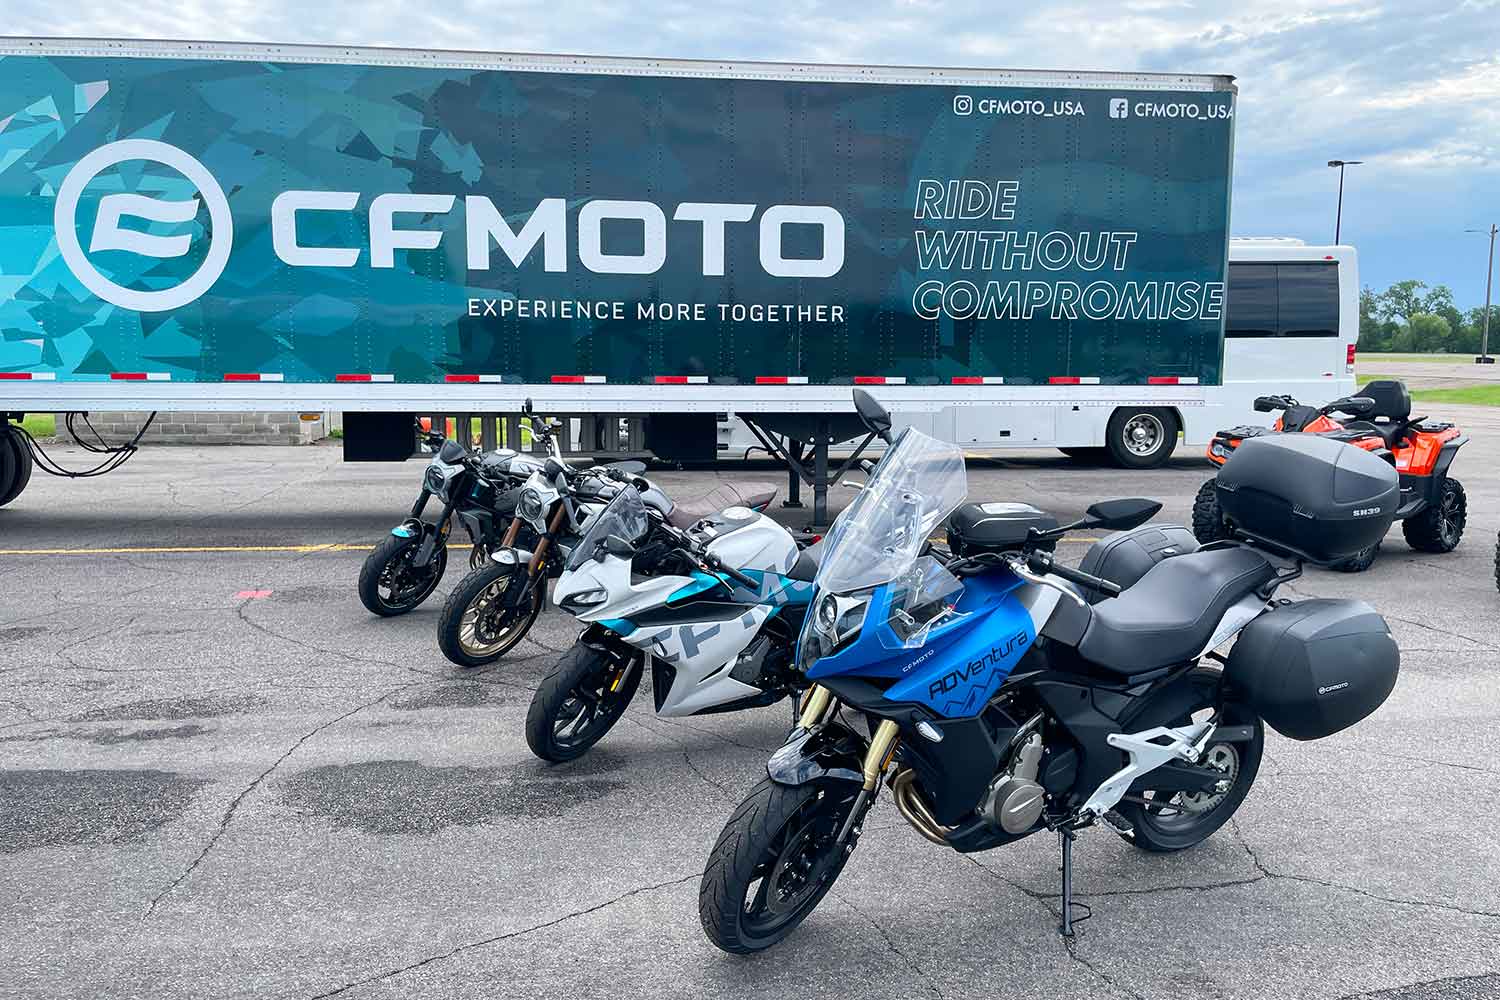 CF Moto - What's the hype all about?